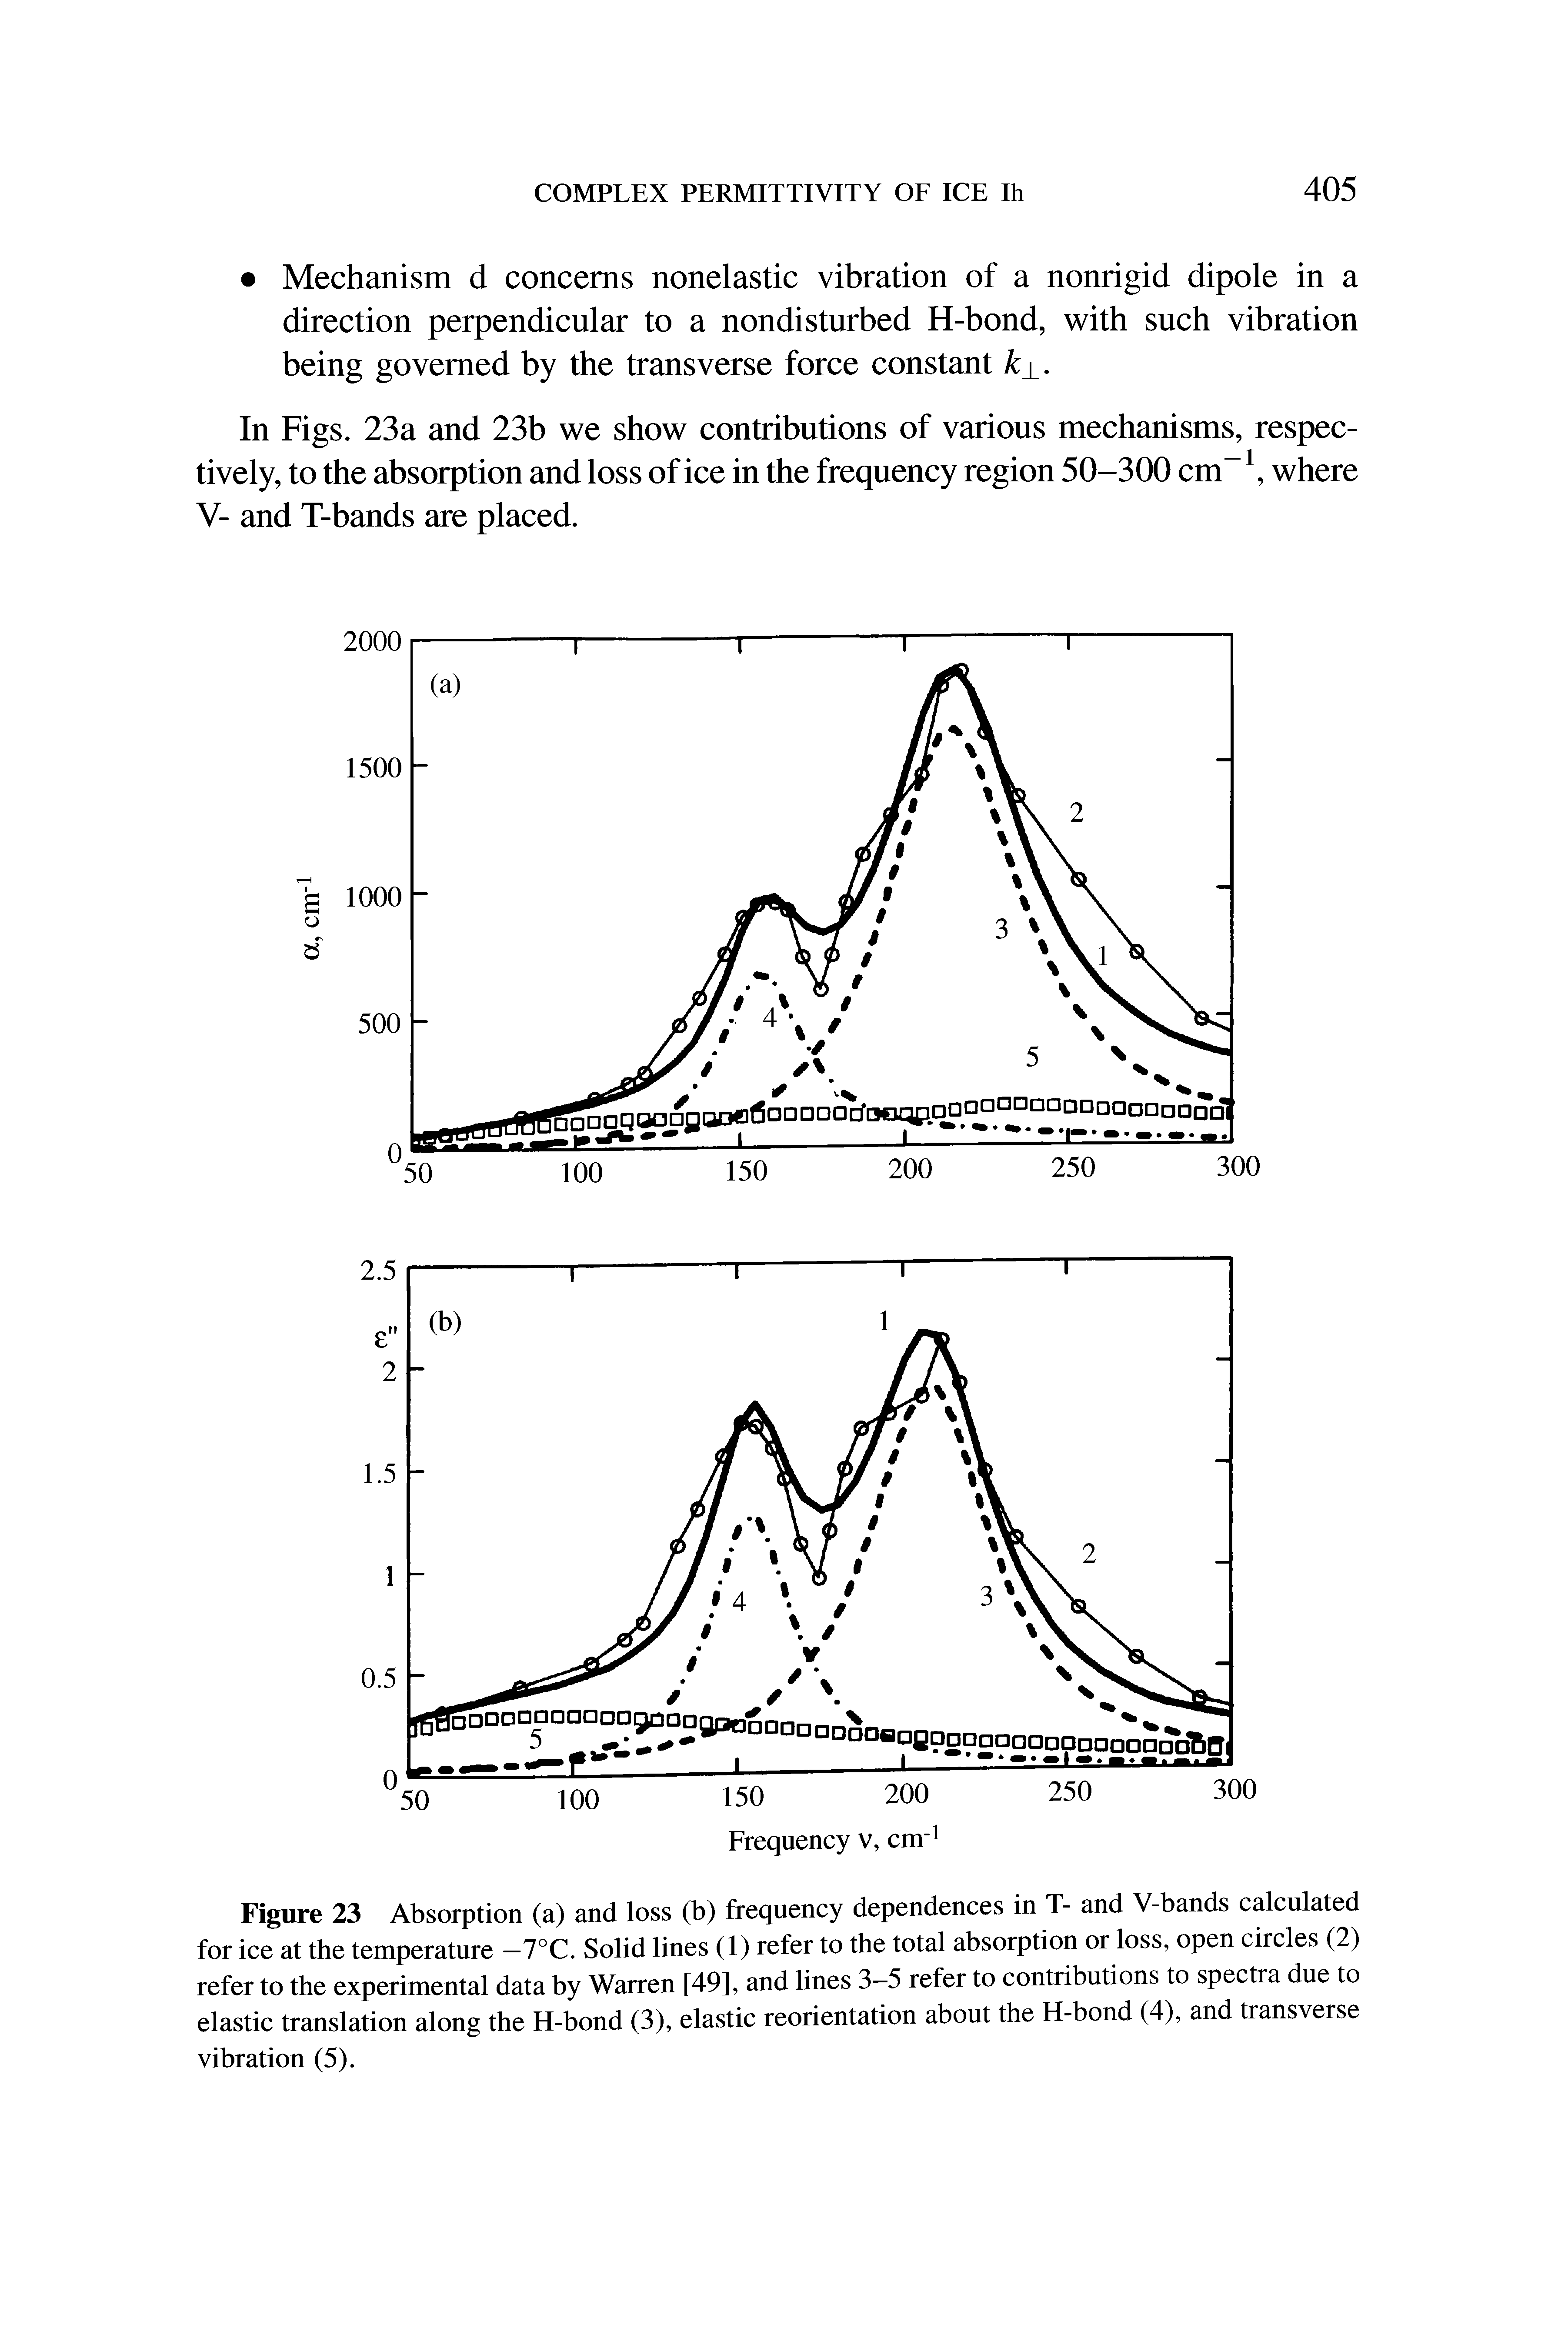 Figure 23 Absorption (a) and loss (b) frequency dependences in T- and V-bands calculated for ice at the temperature —7°C. Solid lines (1) refer to the total absorption or loss, open circles (2) refer to the experimental data by Warren [49], and lines 3-5 refer to contributions to spectra due to elastic translation along the H-bond (3), elastic reorientation about the H-bond (4), and transverse vibration (5).